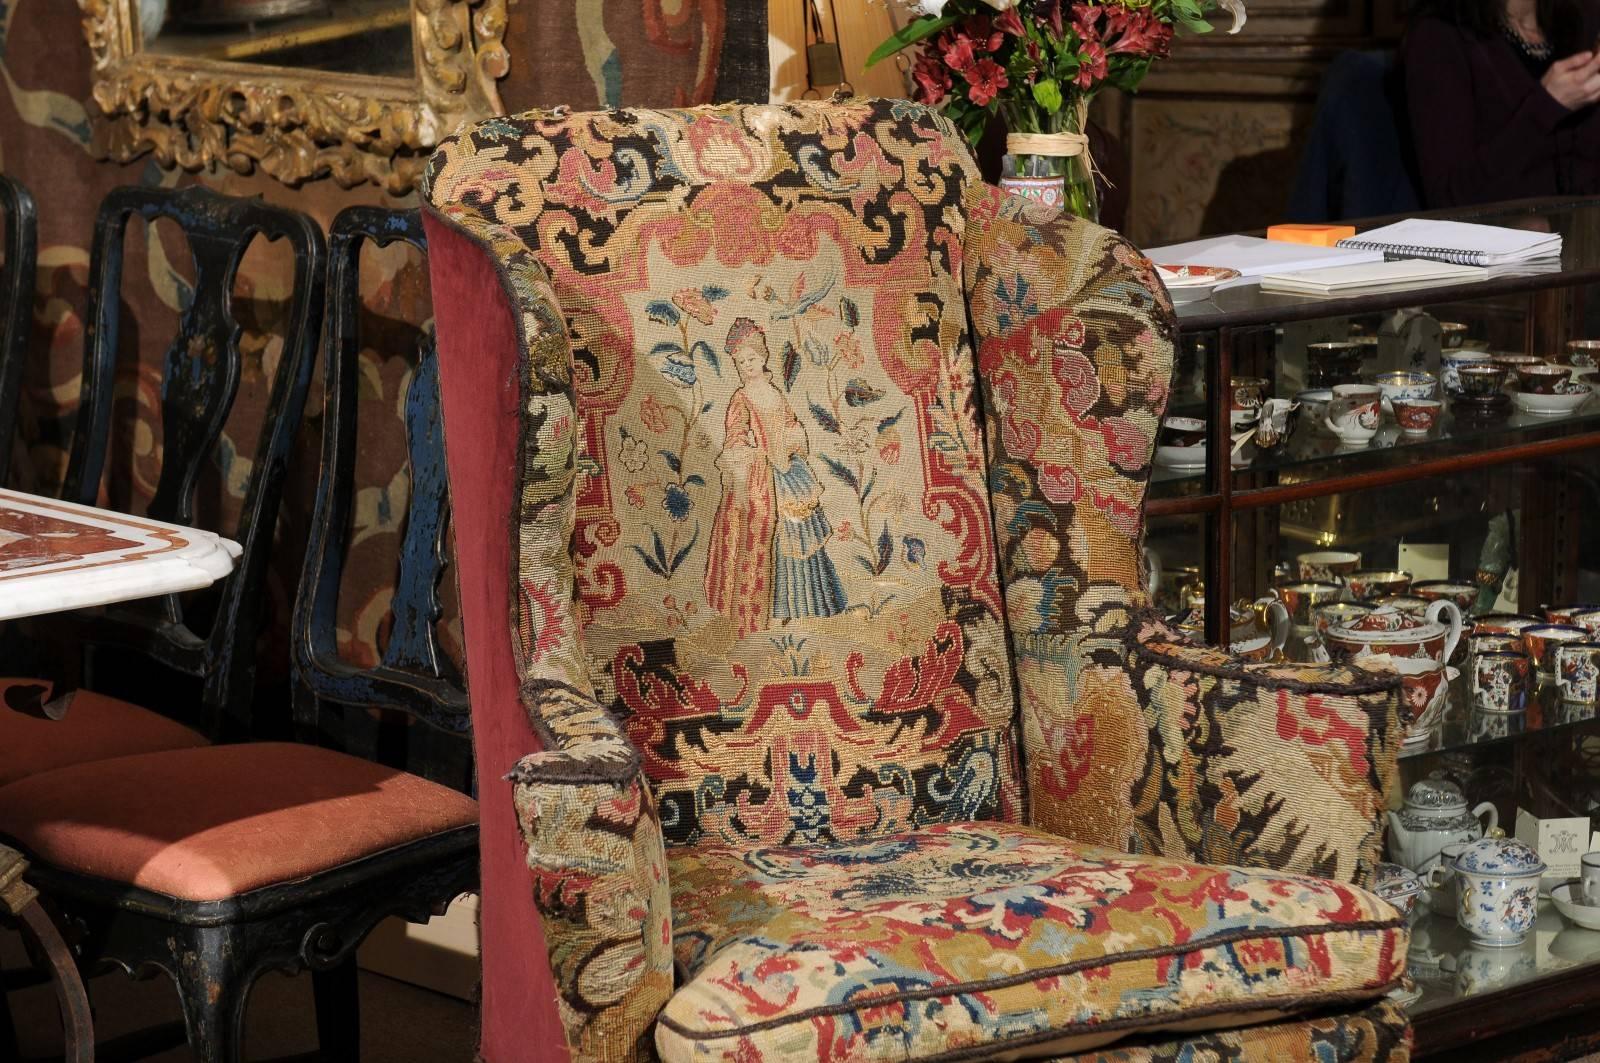 Velvet 18th Century English Queen Anne Wing Chair in Walnut with Needlepoint Tapestry